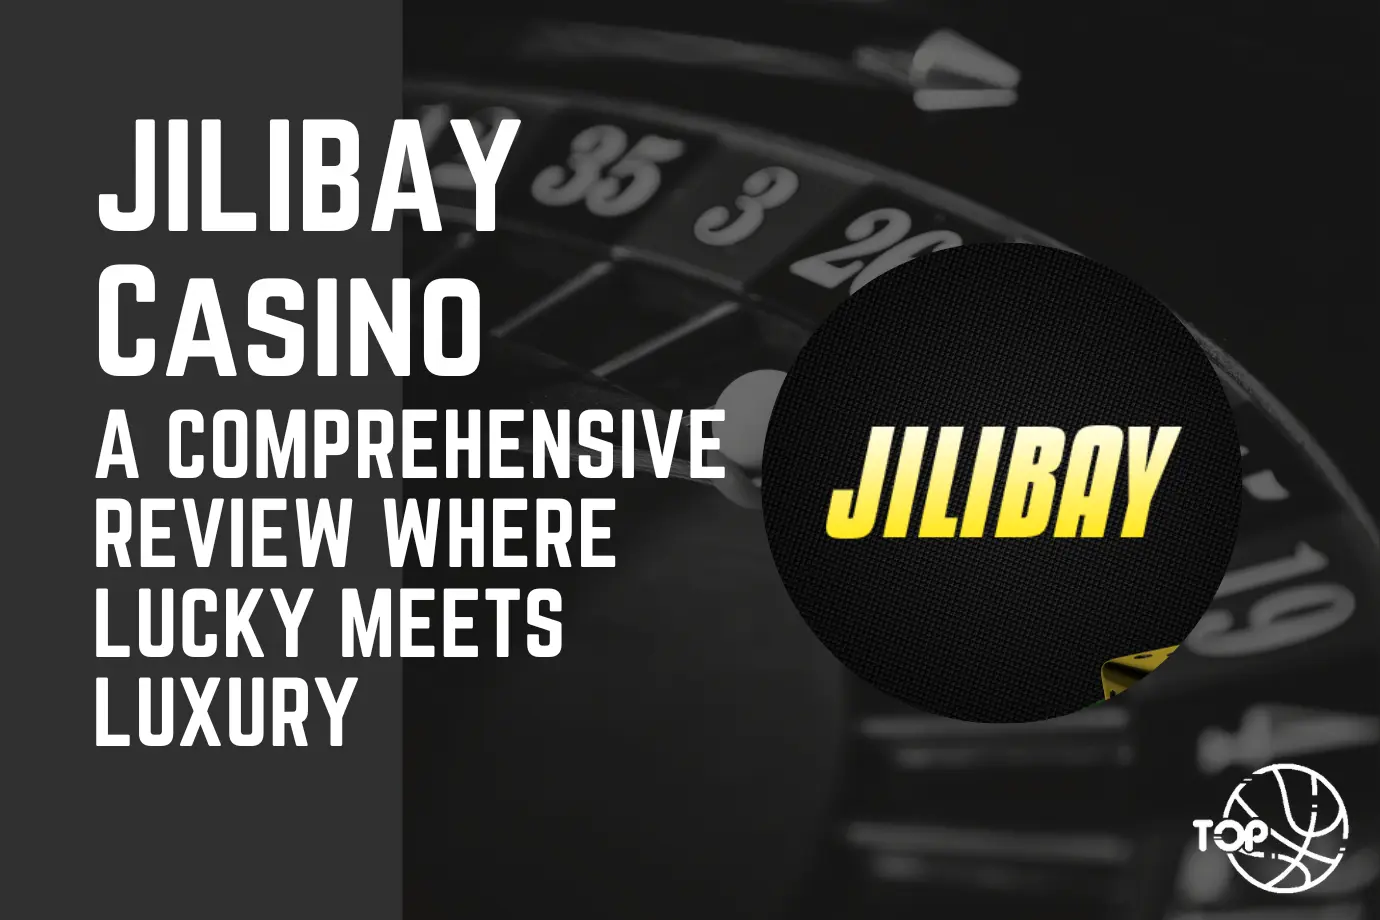 Jilibay: A Comprehensive Casino Review Where Lucky Meets Luxury